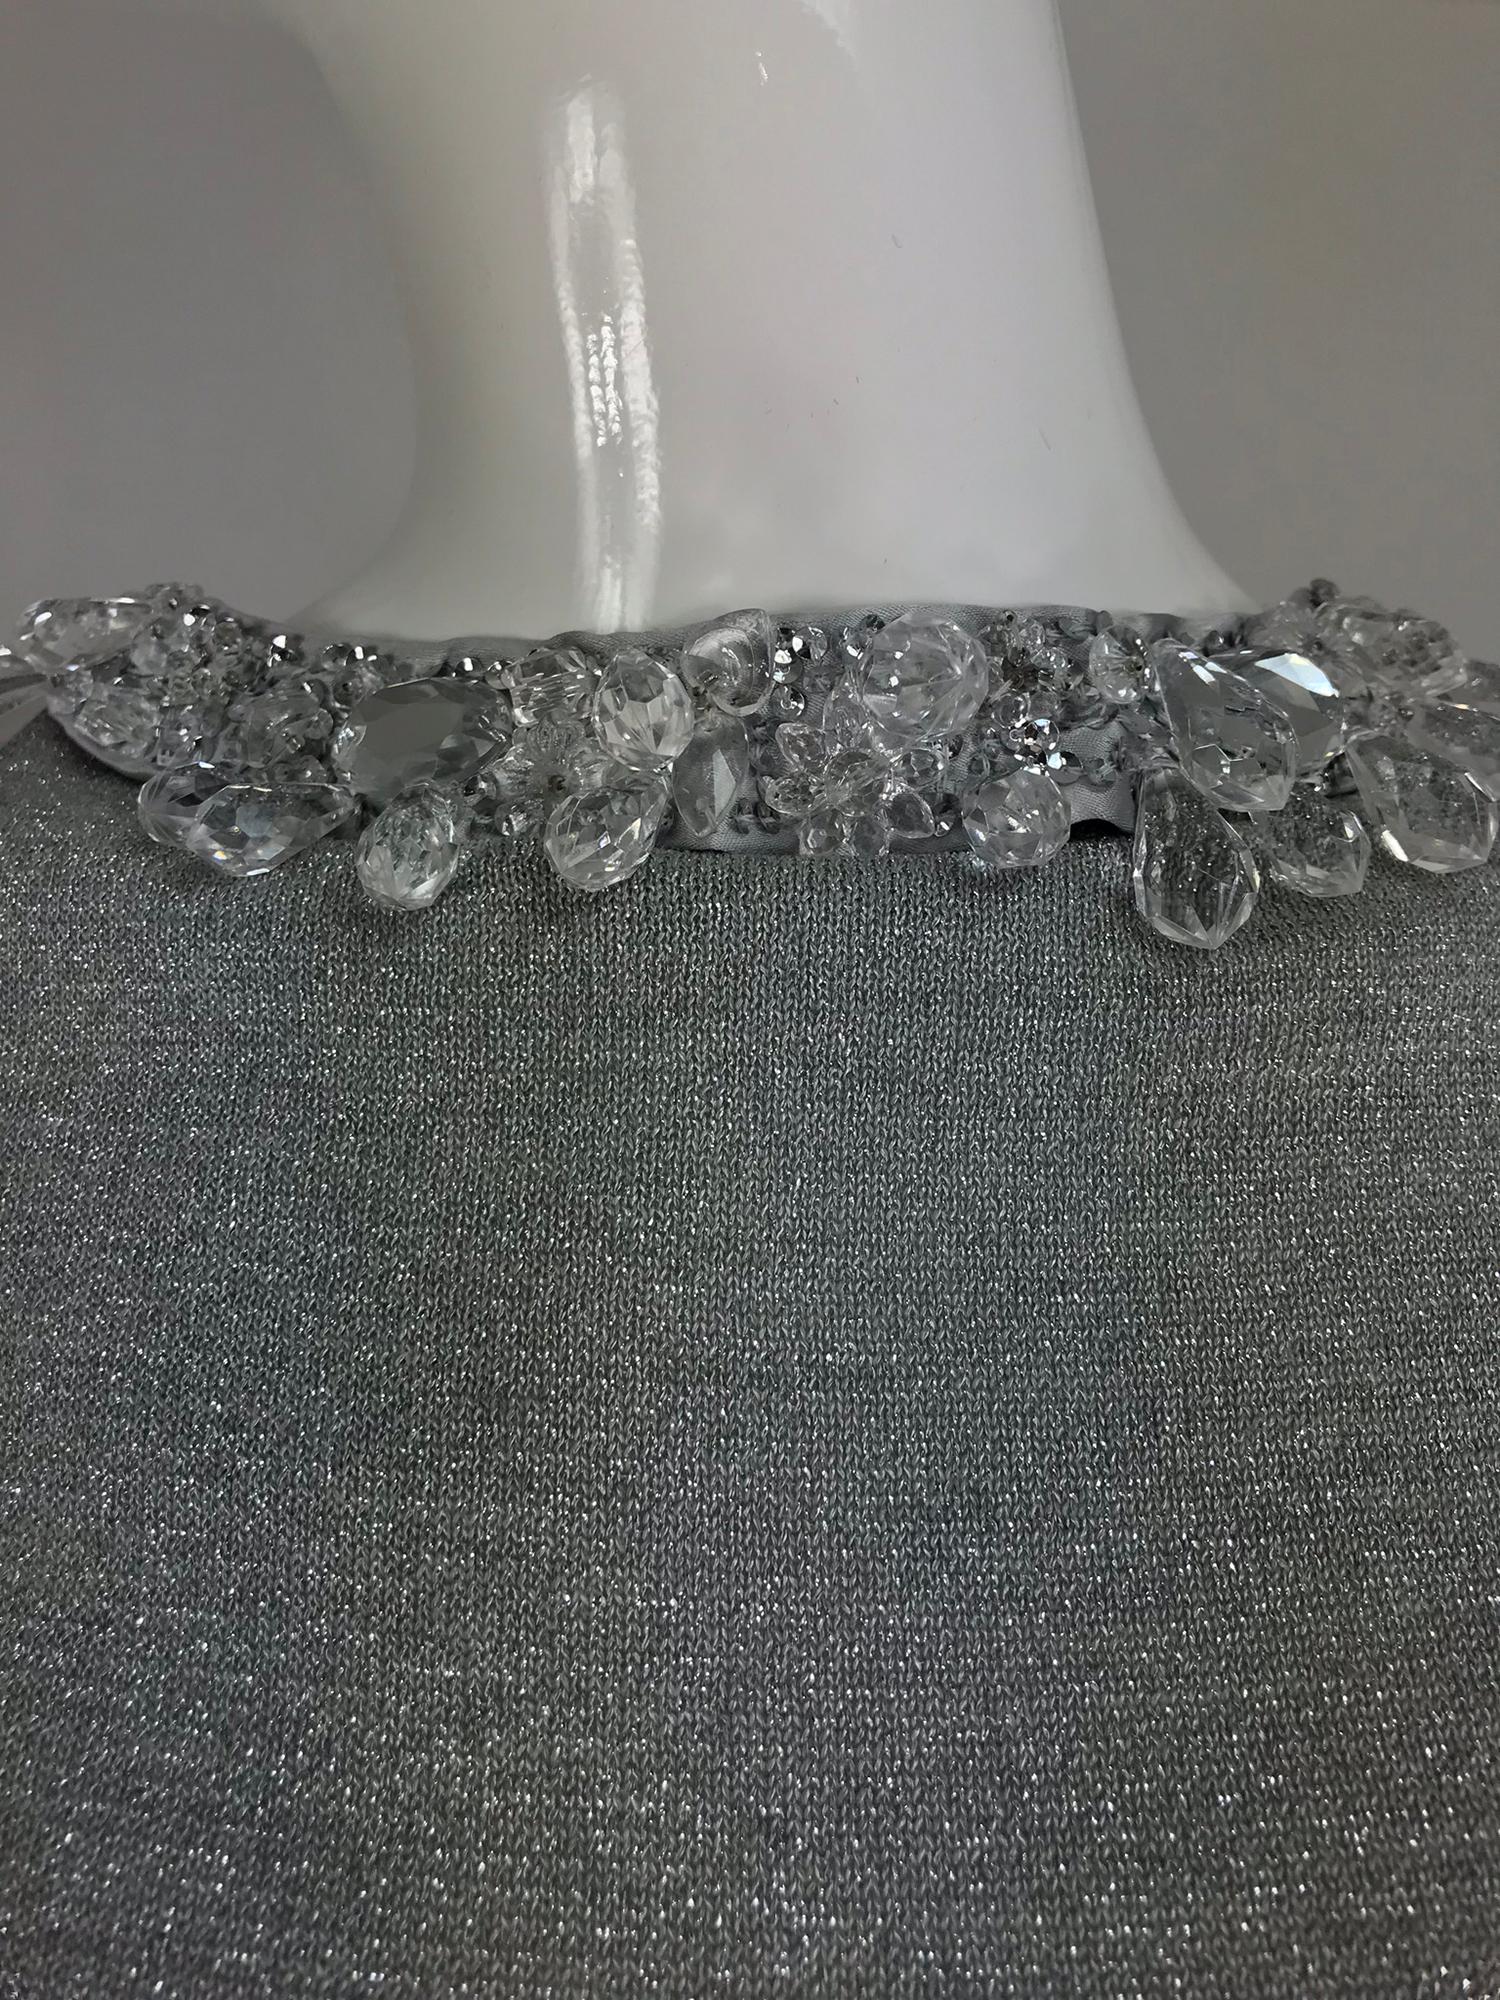 Prada silver metallic grey rhinestone collar cardigan sweater. Button at the front or back, unlined cardigan sweater has a heavily crystal, mirror and sequin neckline. Closes with silver buttons. Fits a size small. The label has been removed.

In